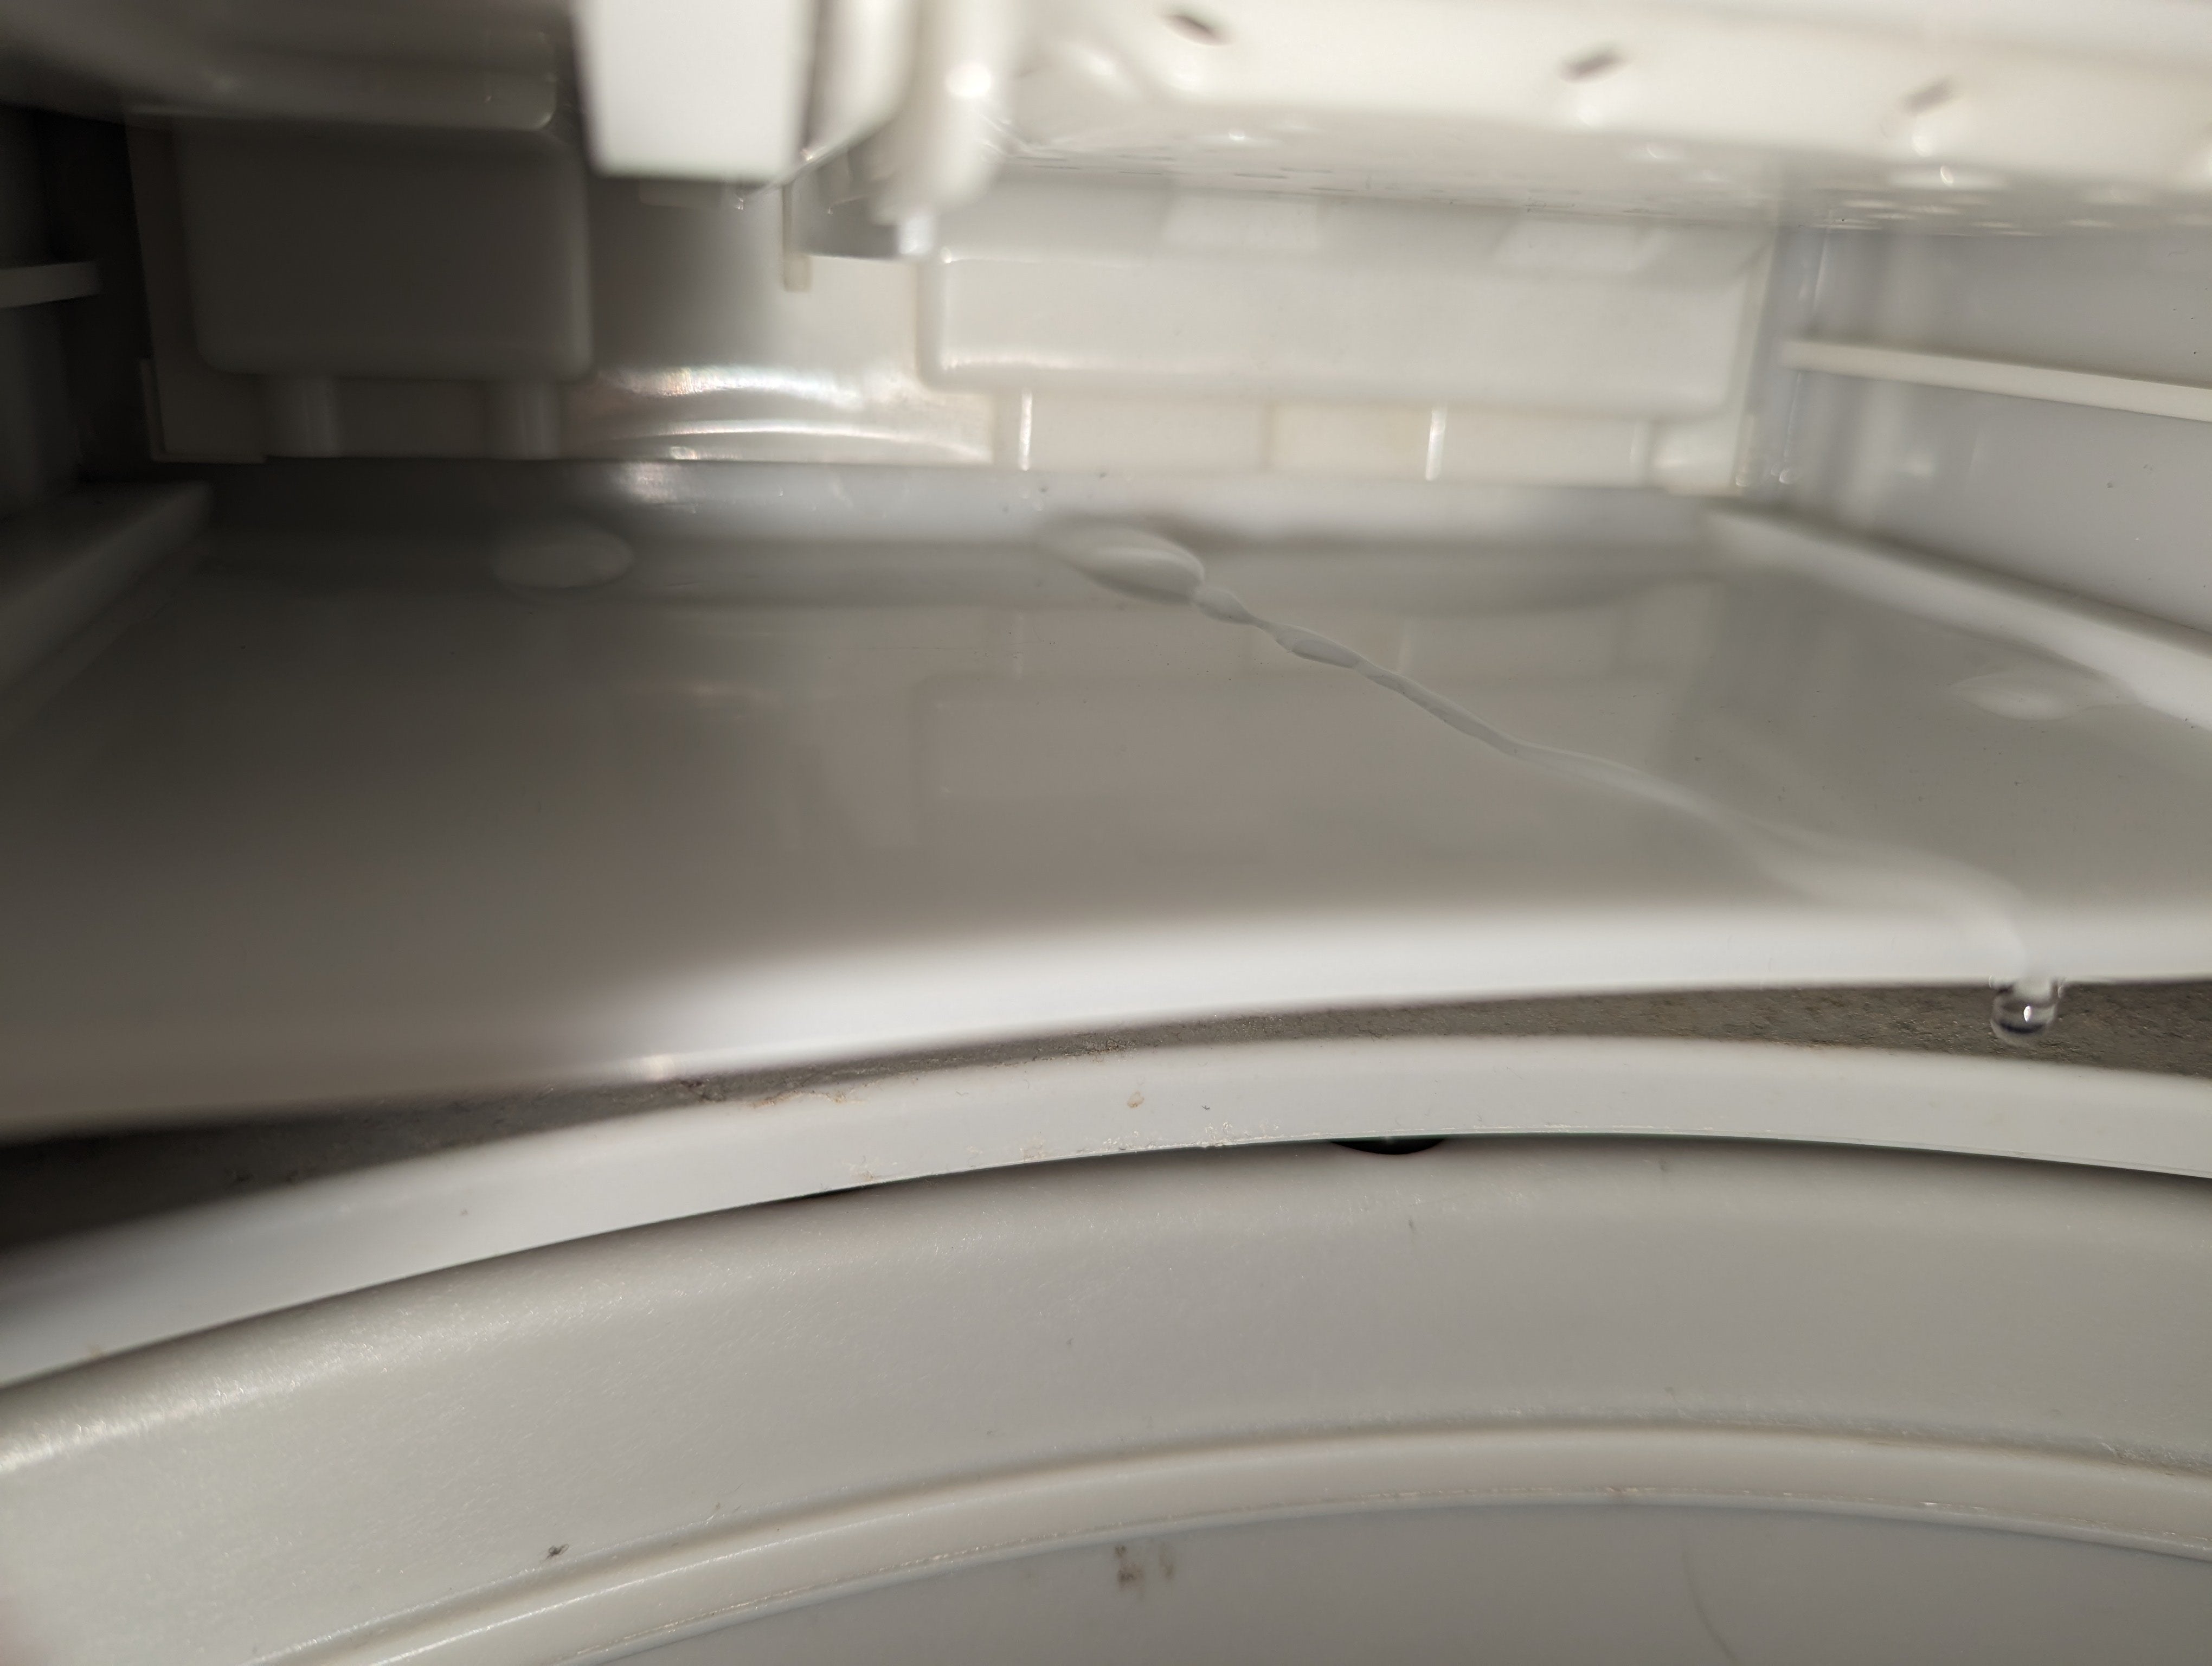 How to Troubleshoot LG Refrigerator Leaks